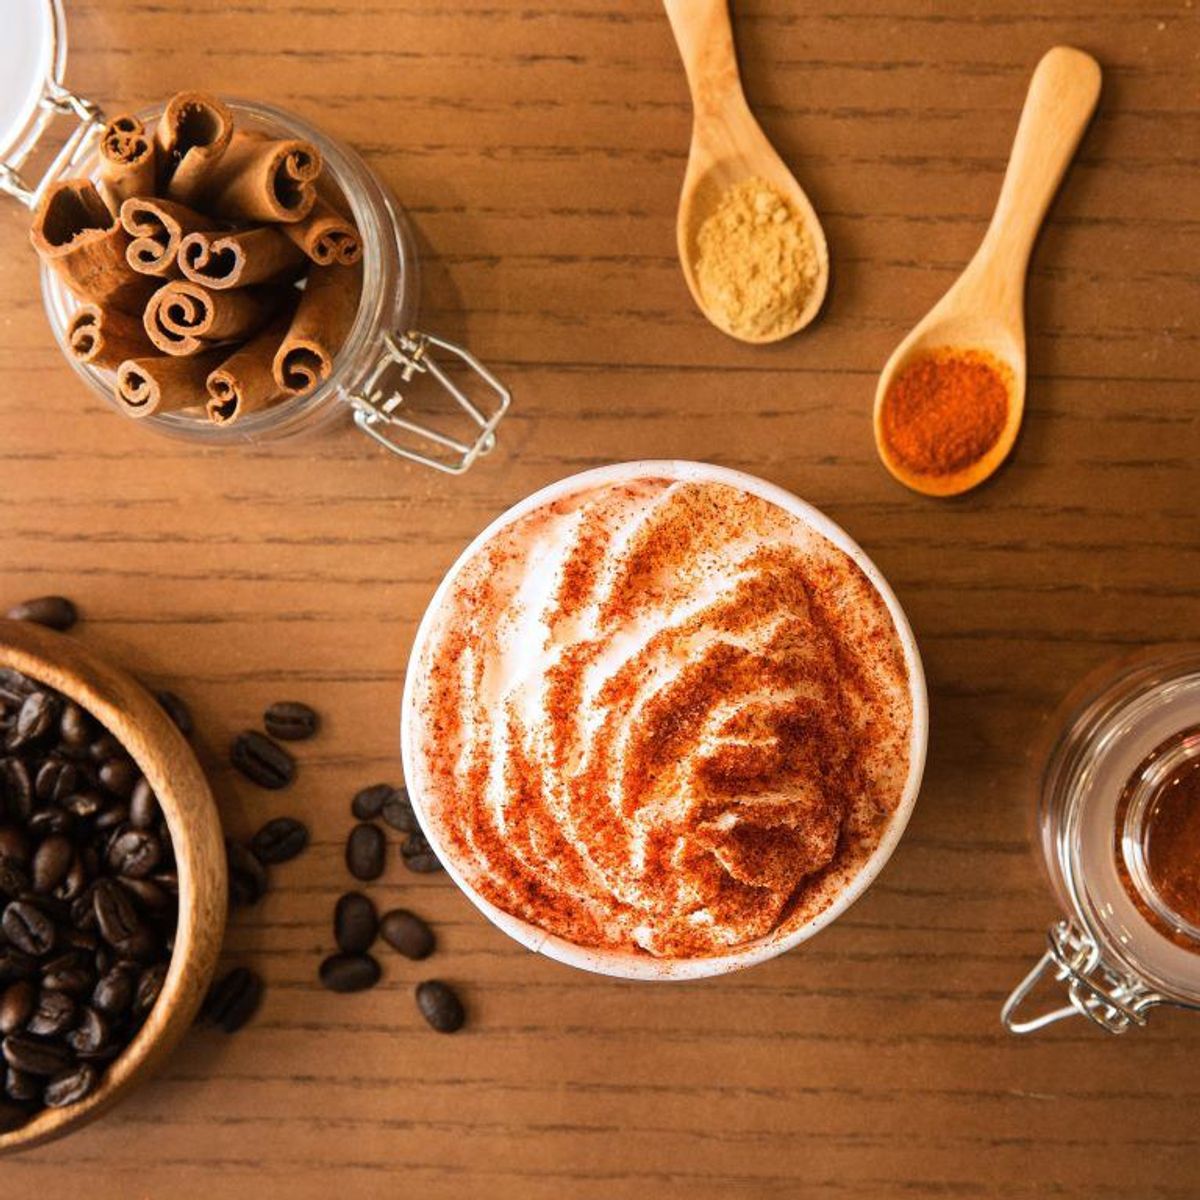 Forget Pumpkin Spice, Chile Mocha is here